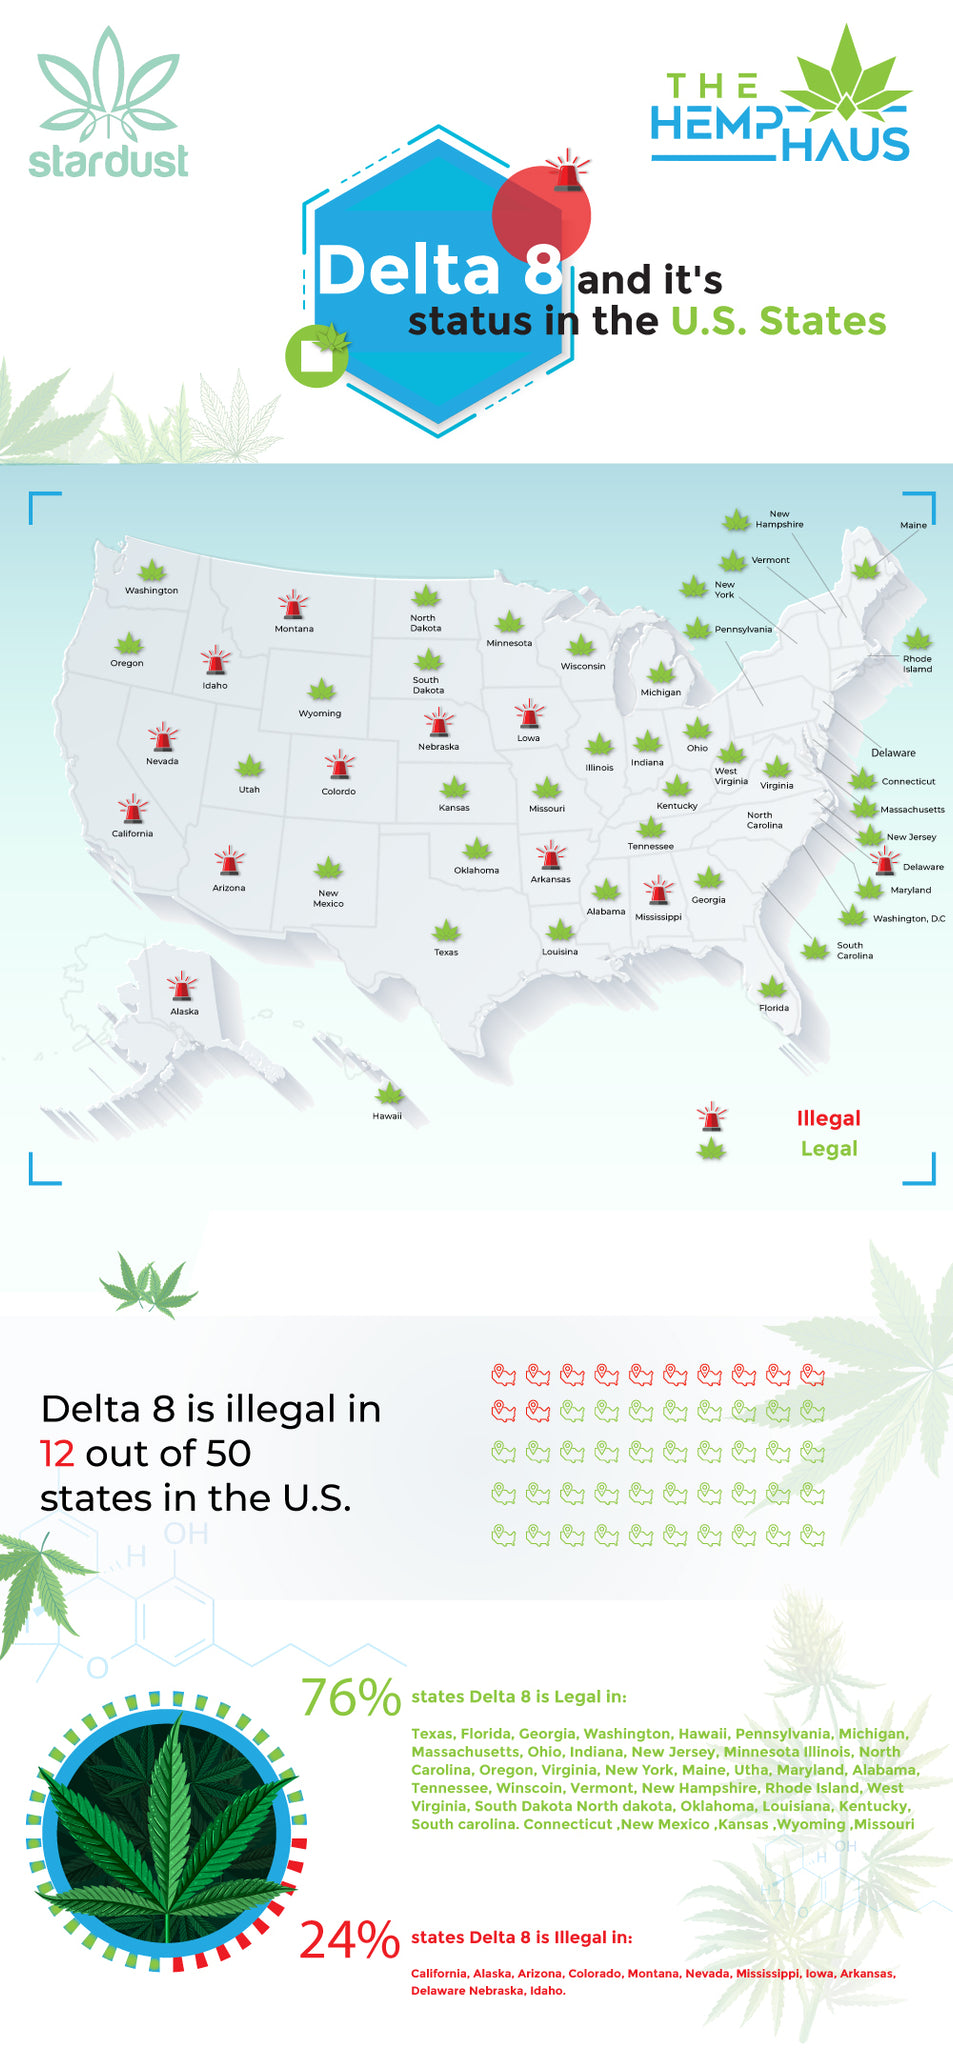 Infographic-Legal-status-of-Delta-8-THC-near-me-and-Available-at-The-Hemp-Haus-CBD-Store-and-Delta-8-Store.jpg